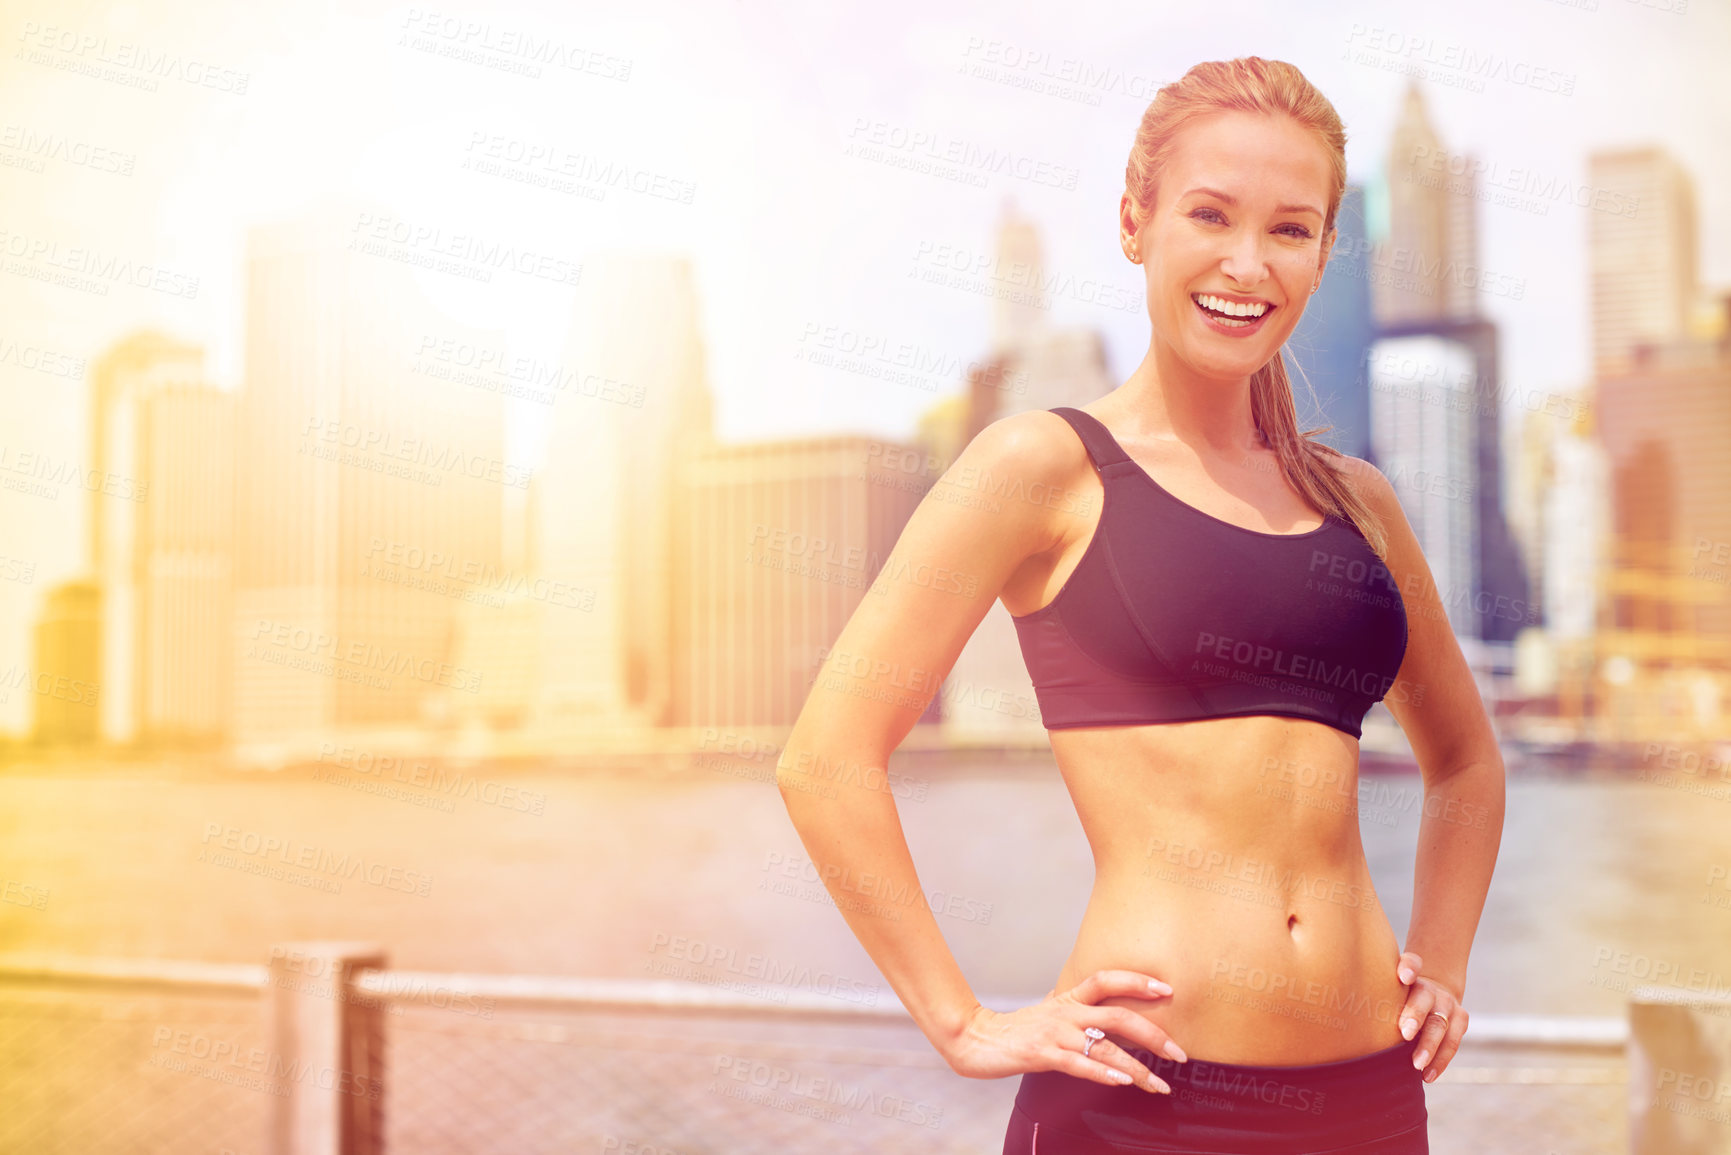 Buy stock photo Portrait of a beautiful young woman standing beside a river while out for a run in the city